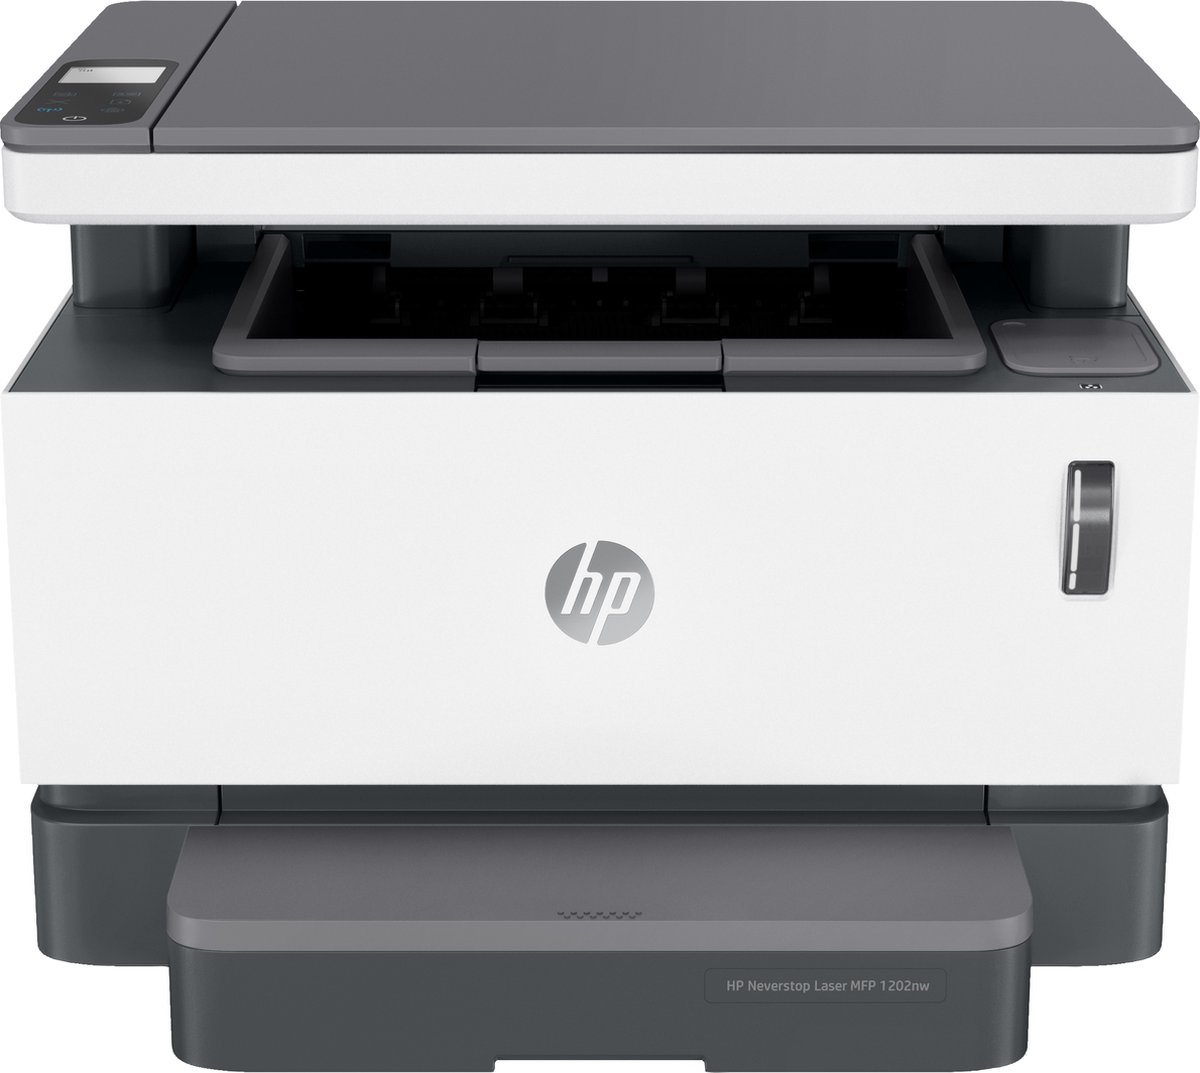 HP Neverstop Laser 1202nw - All-in-One printer - HP